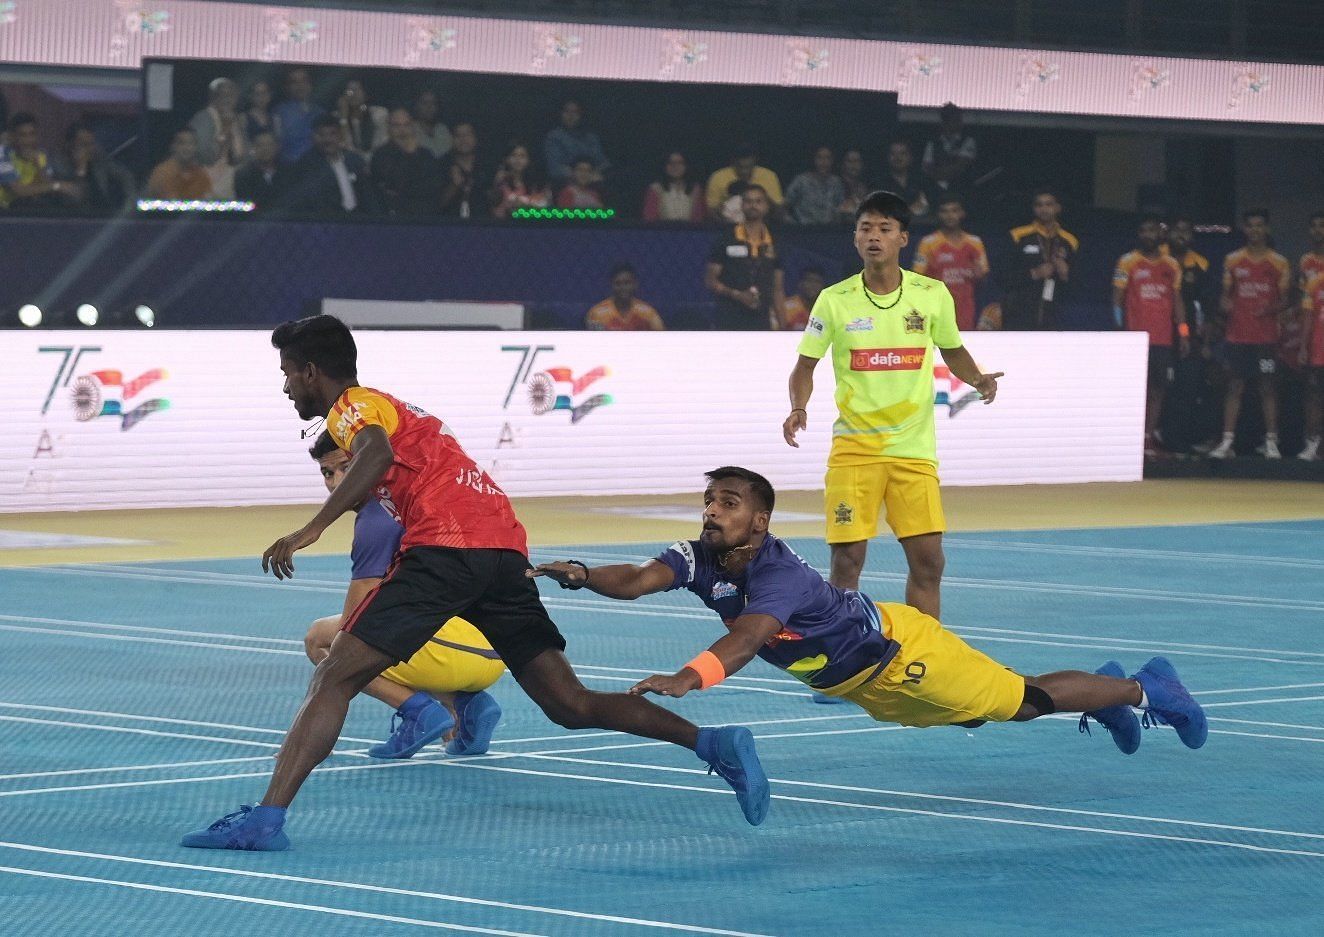 Chennai Quick Guns in action in the Ultimate Kho-Kho league.